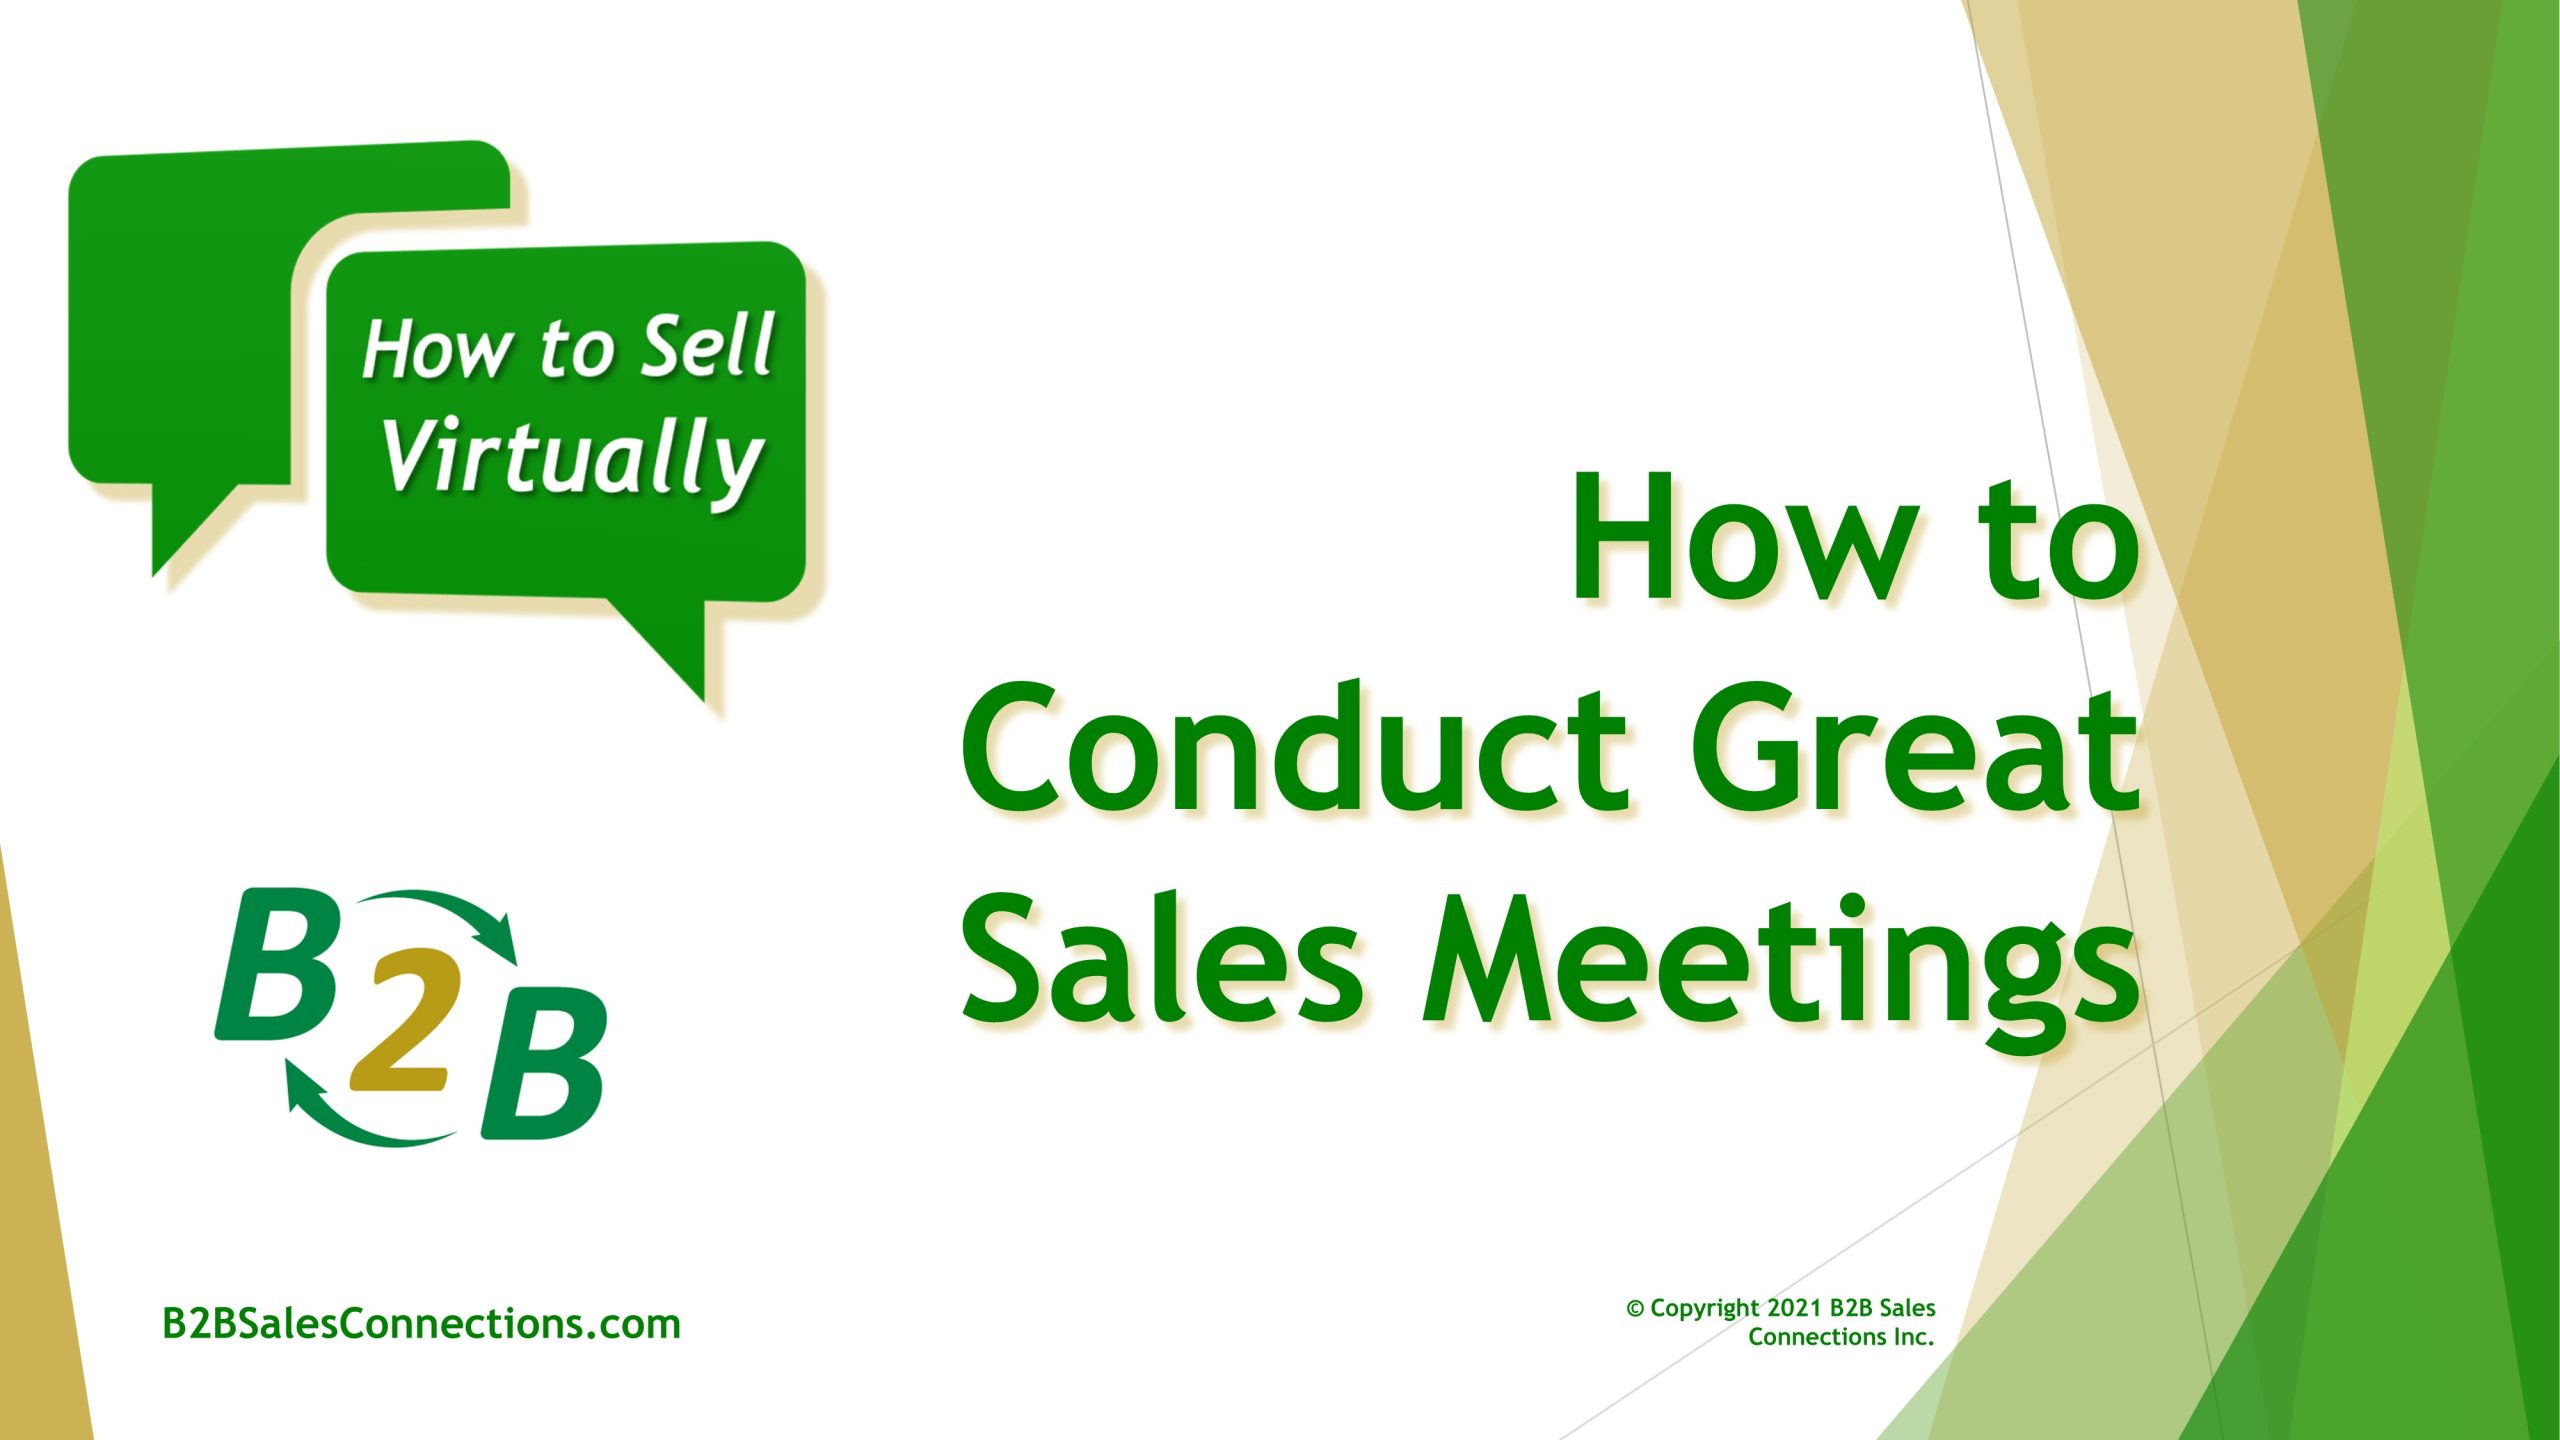 How to Conduct Great Sales Meetings